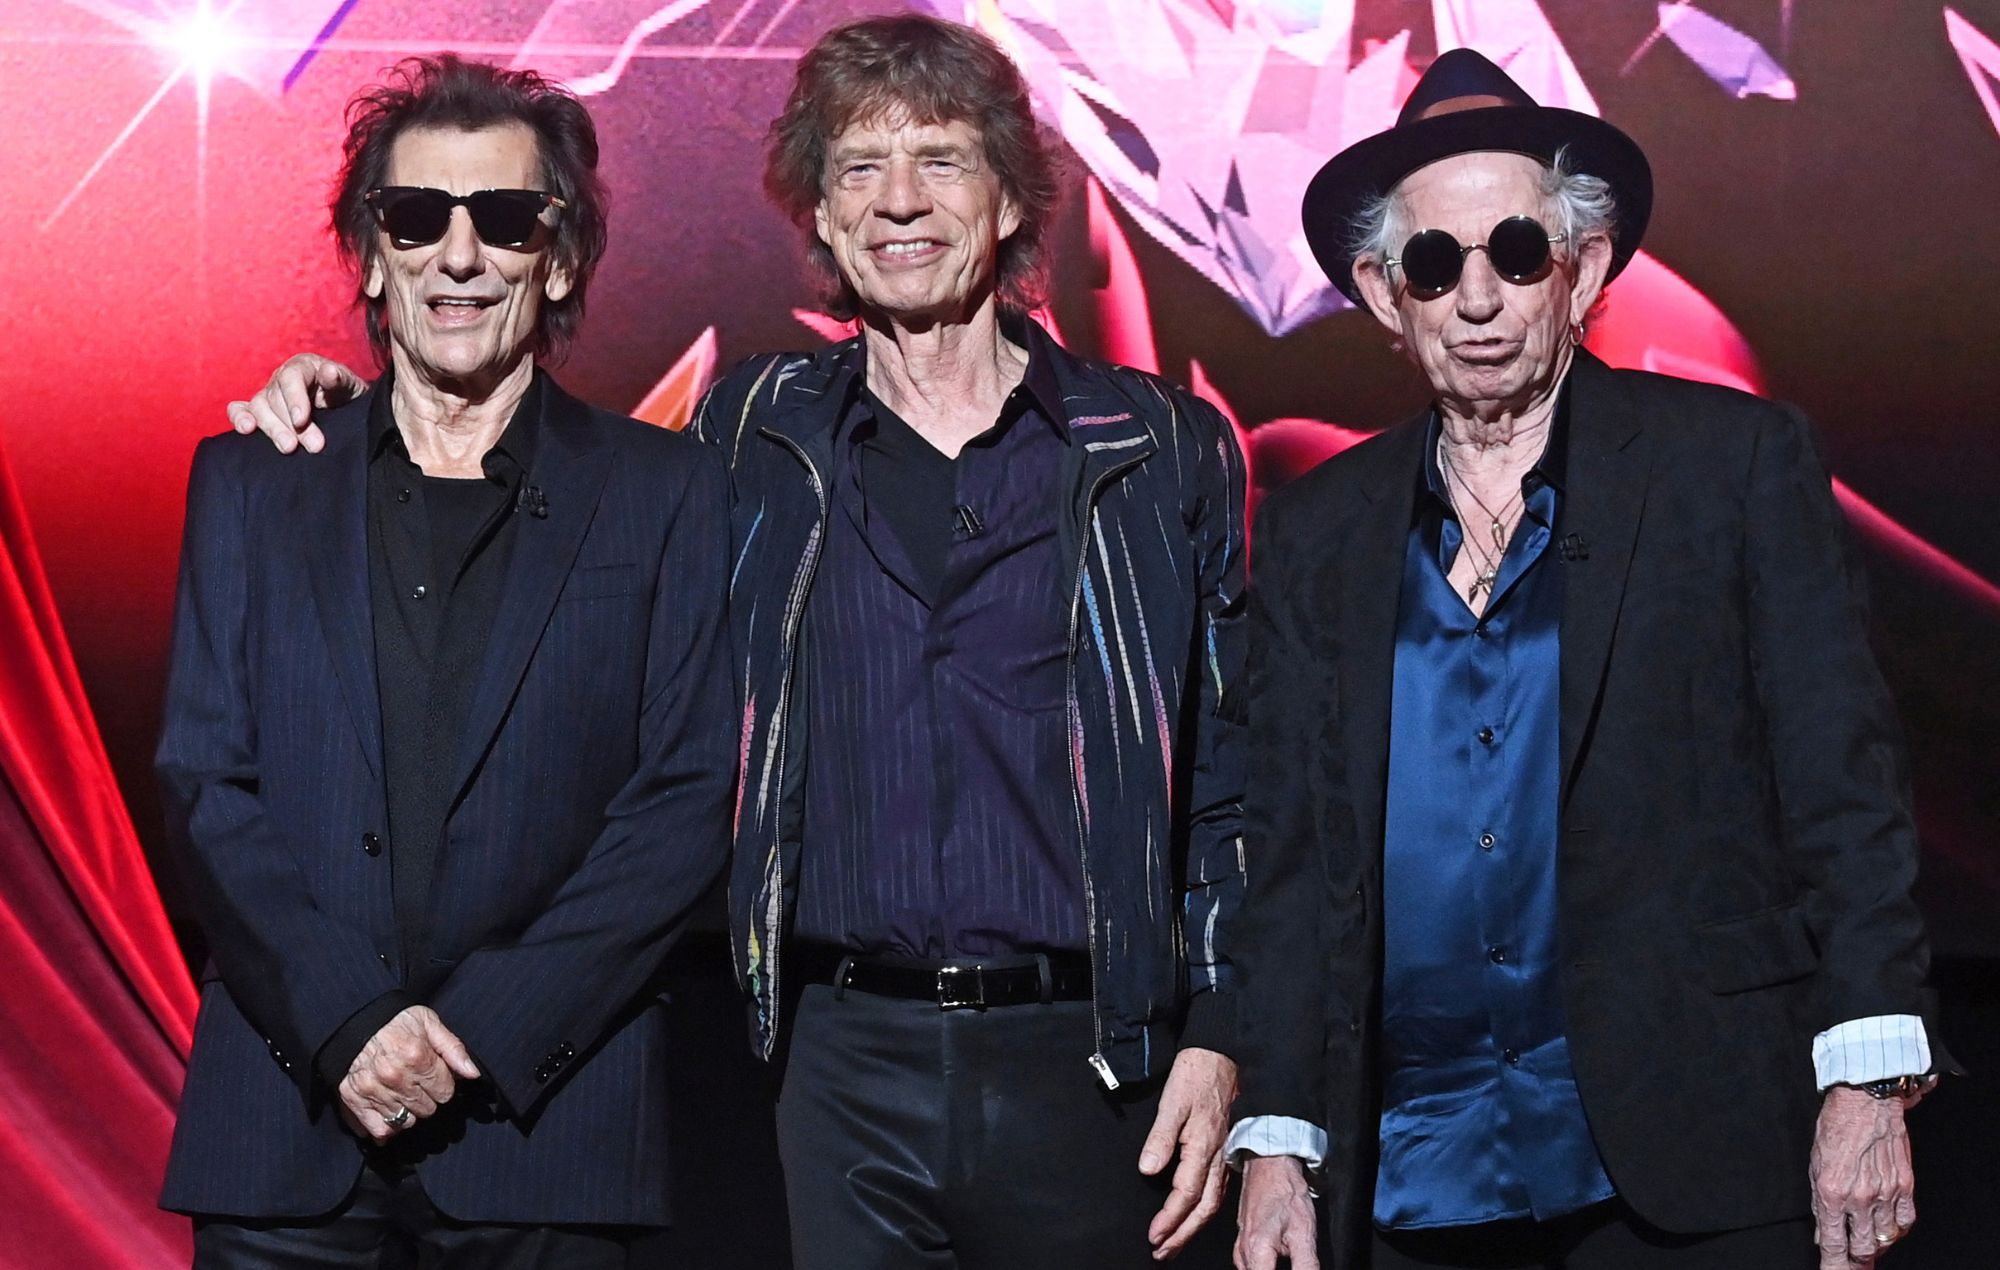 Fans react to The Rolling Stones’ US tour being sponsored by the American Association of Retired Persons